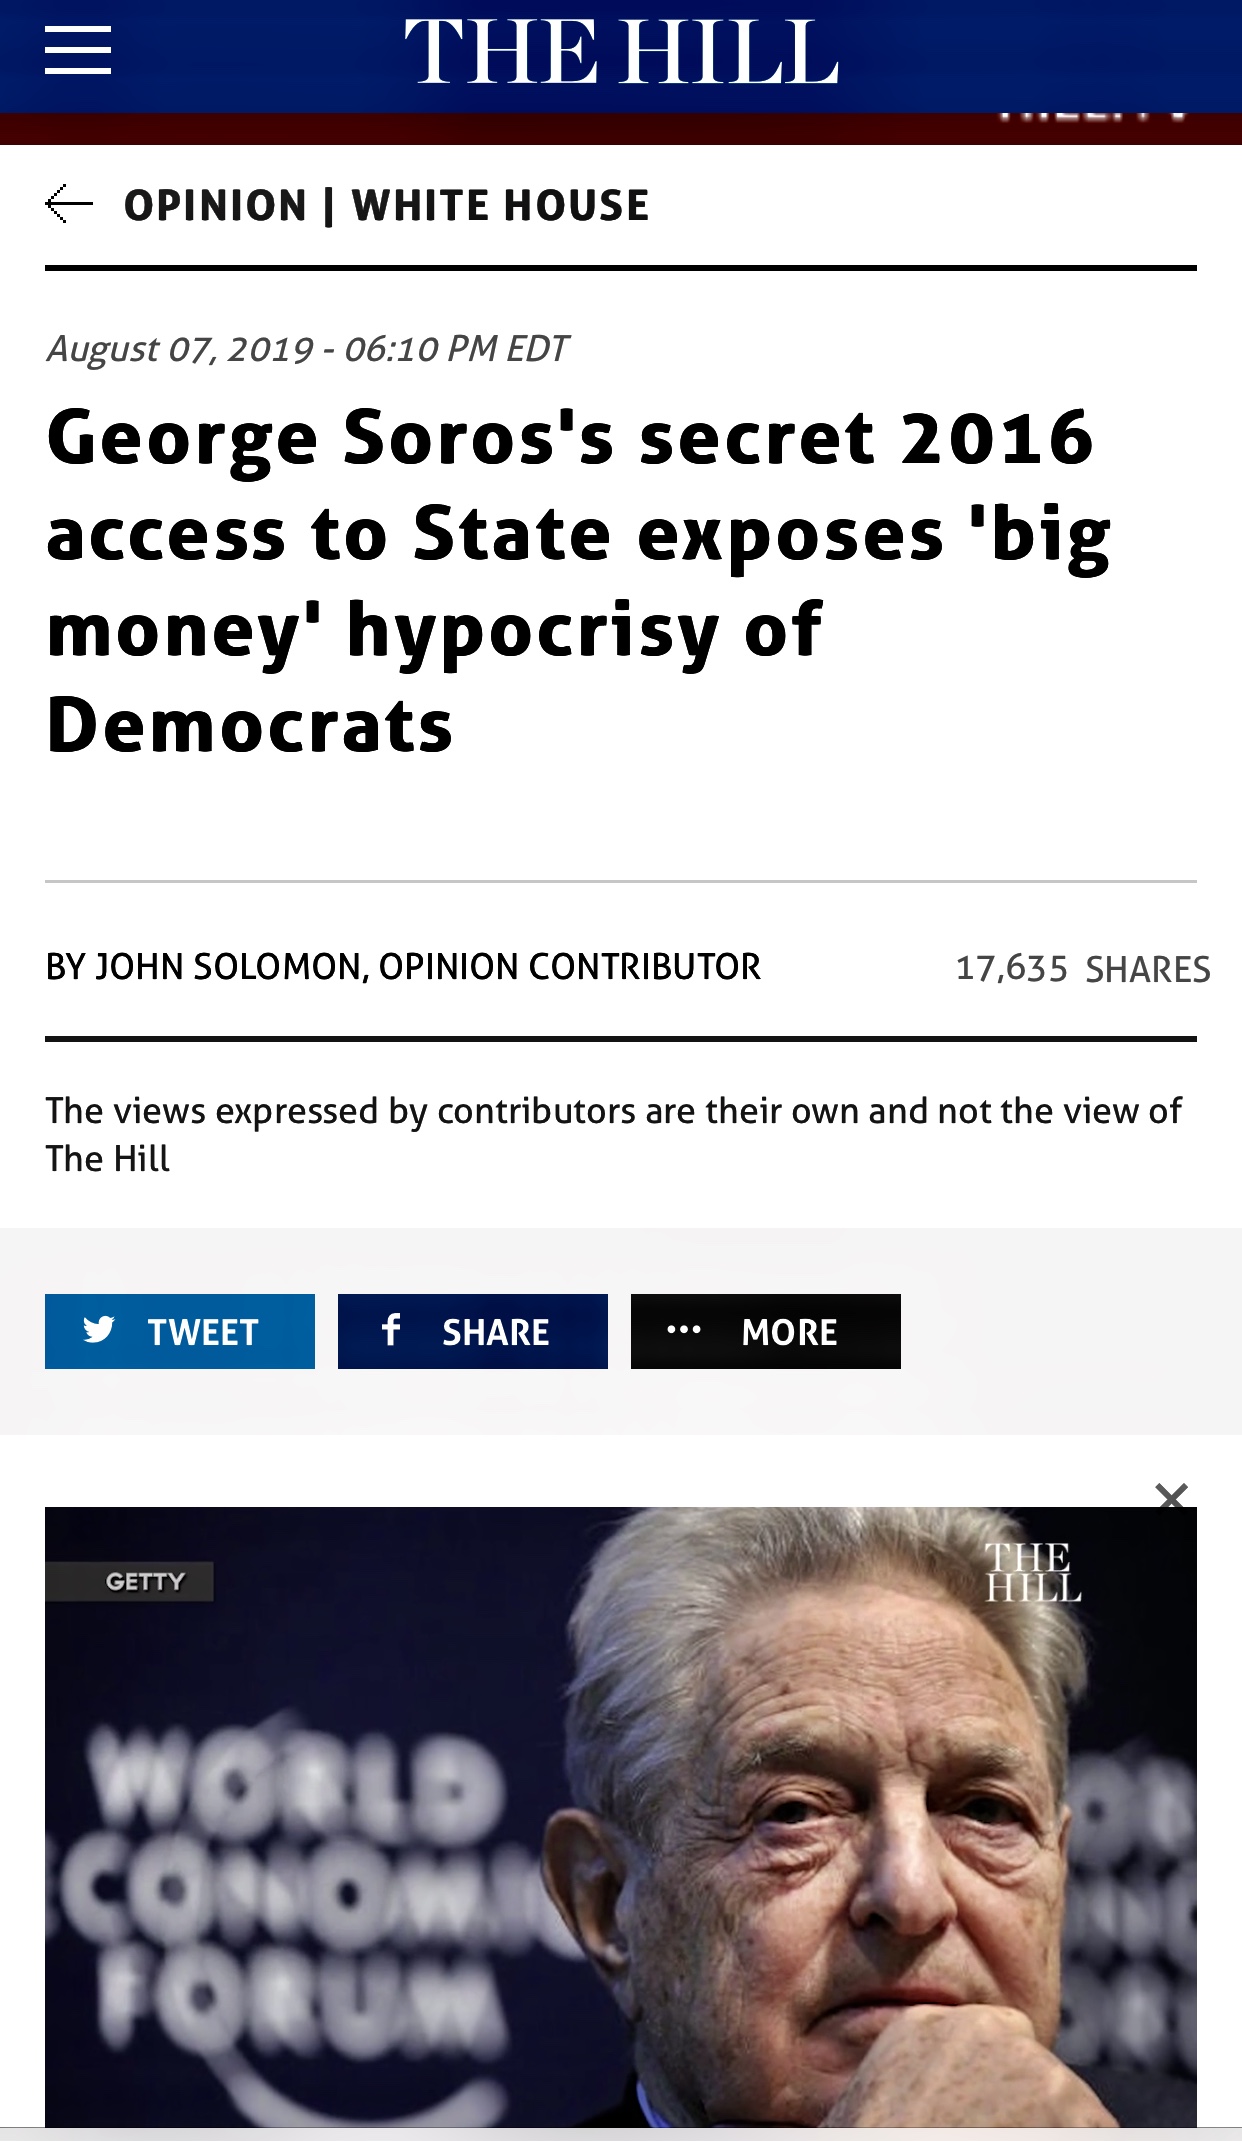 George Soros’s Secret 2016 Access to State Exposes ‘Big Money’ Hypocrisy of Democrats | TheHill